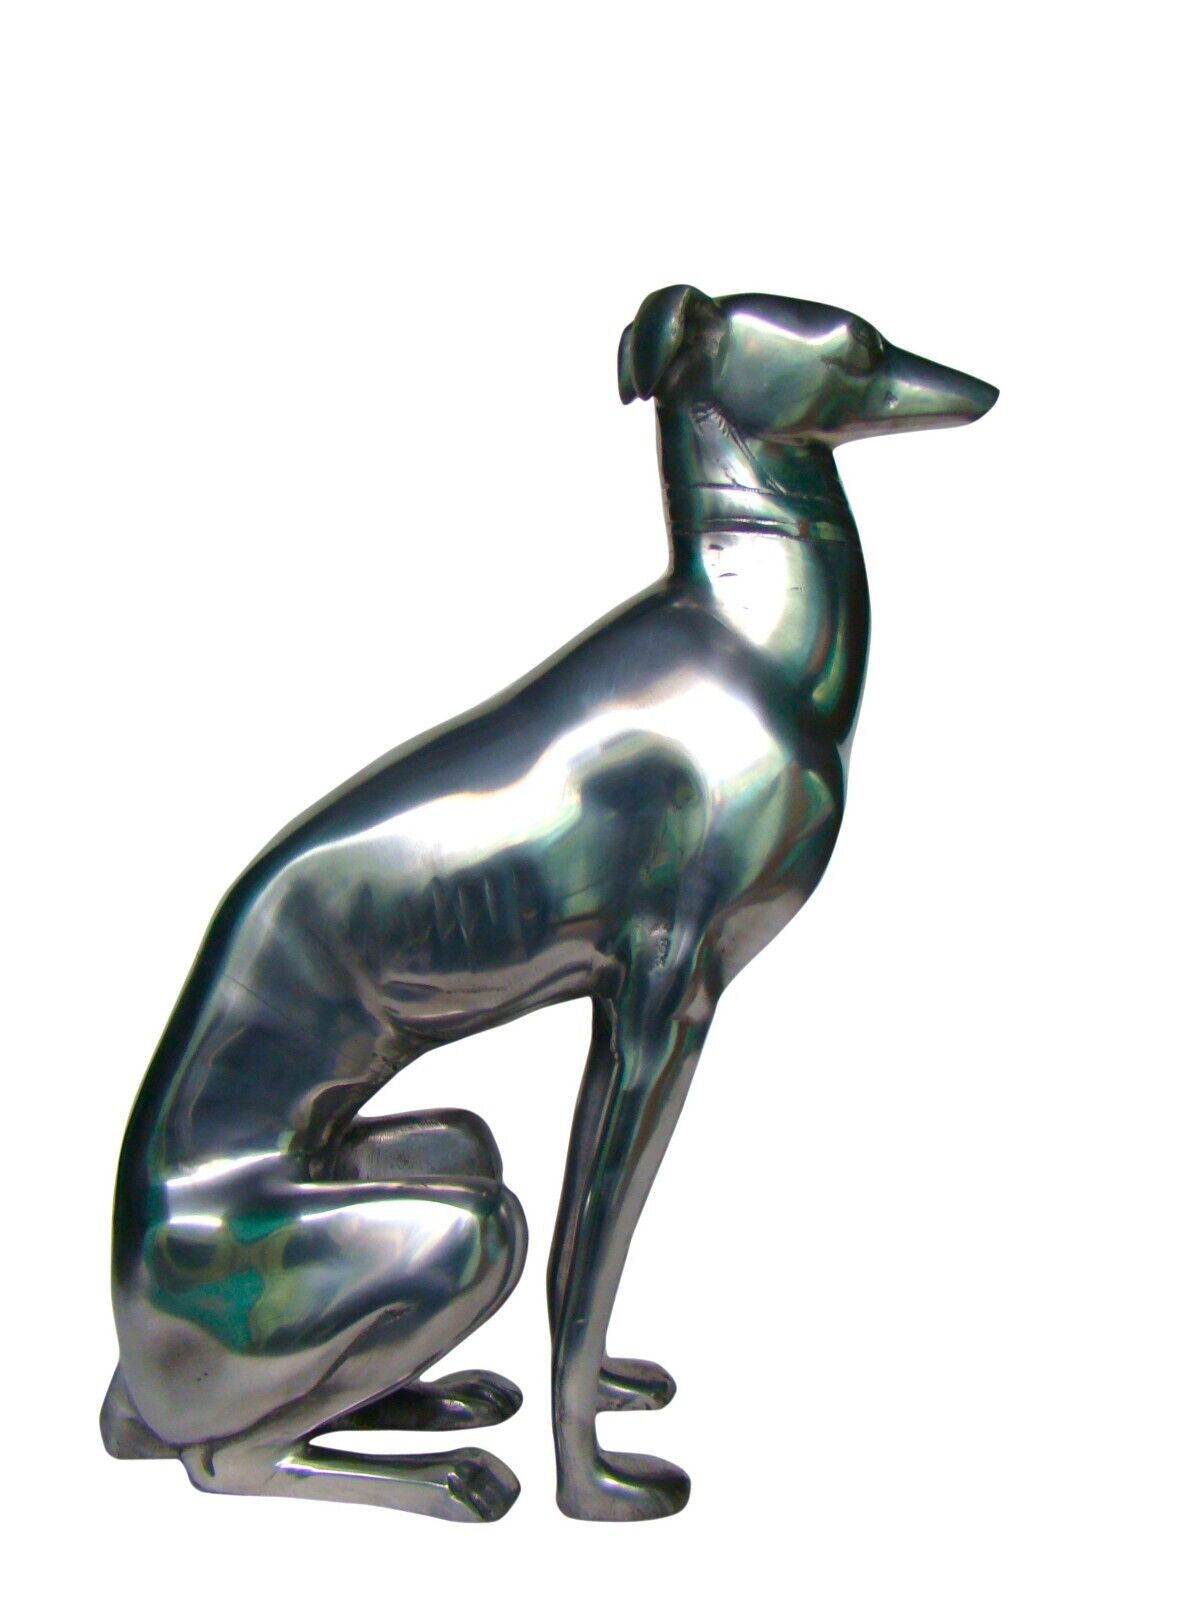 Aluminium LARGE GREYHOUND Whippet Sculpture STATUE 20 inches